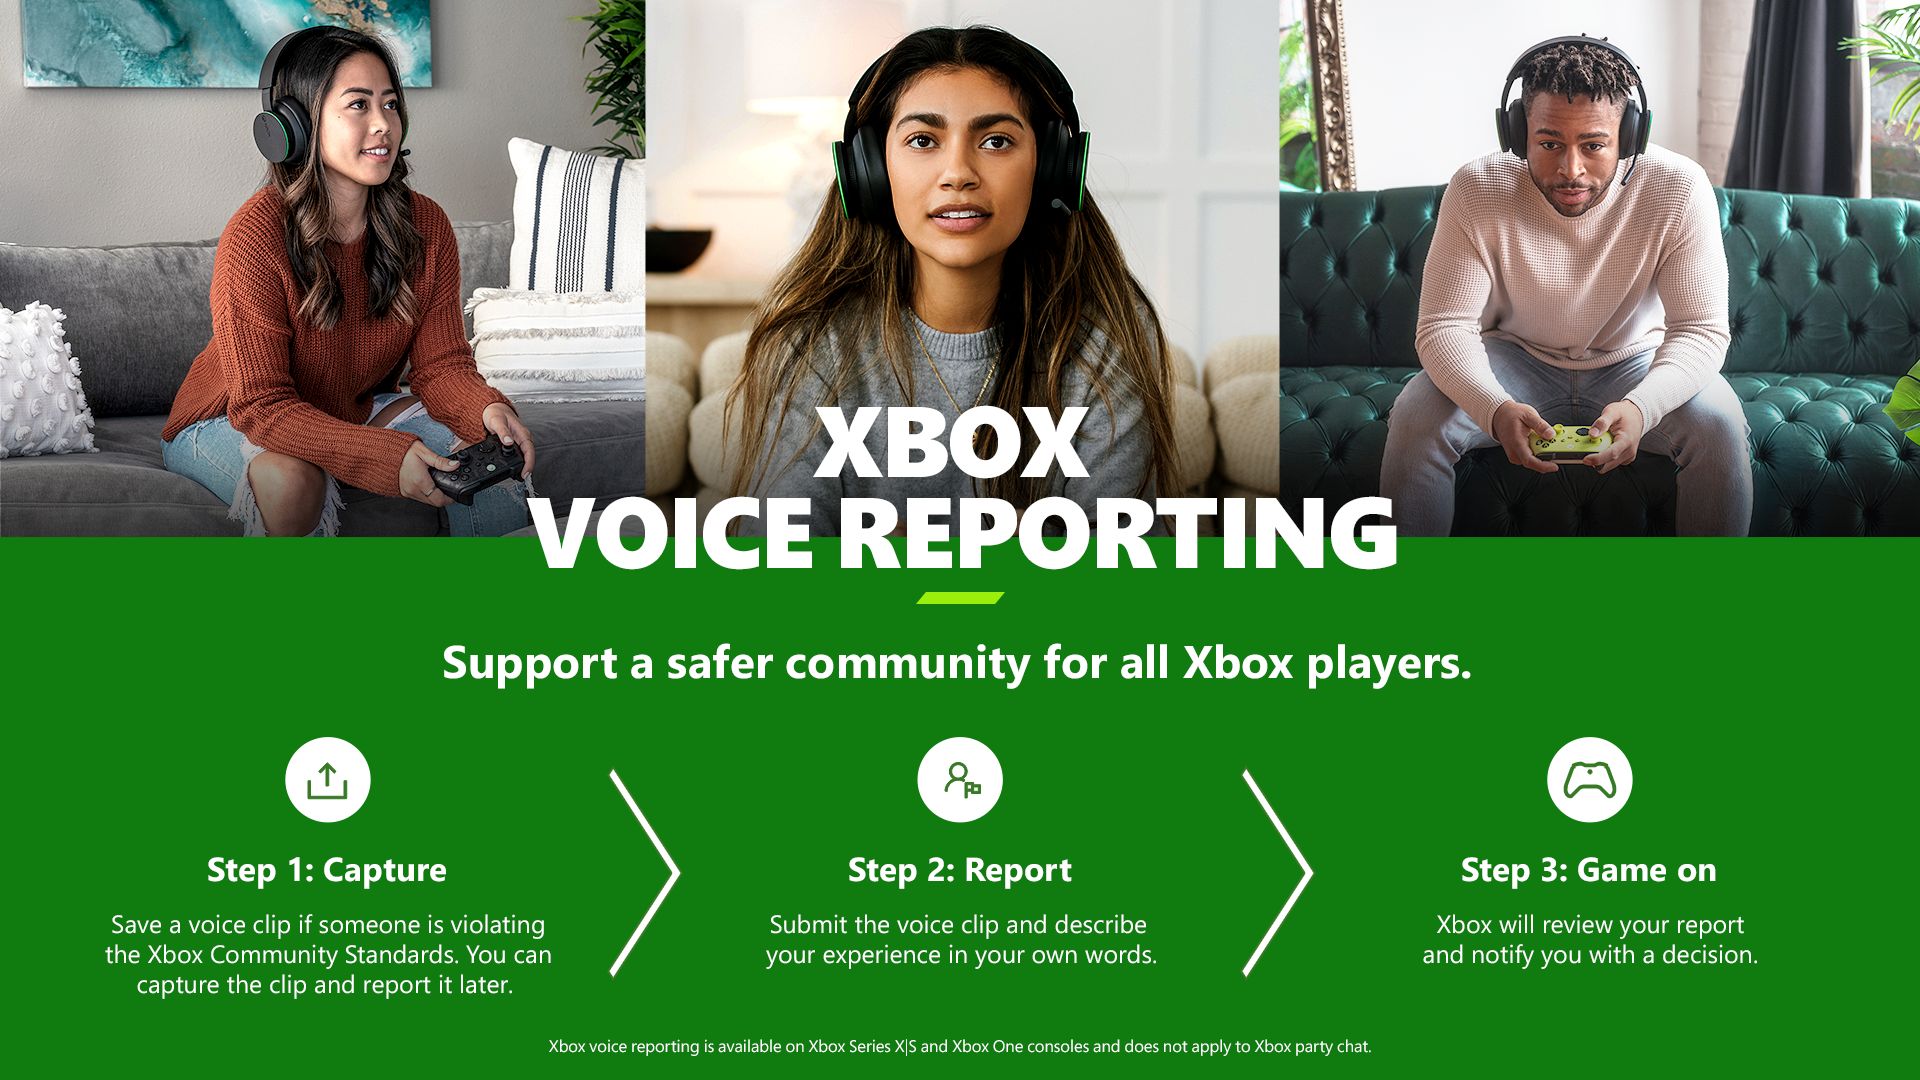 Discord Voice Is Now Available for Everyone on Xbox Consoles - Xbox Wire